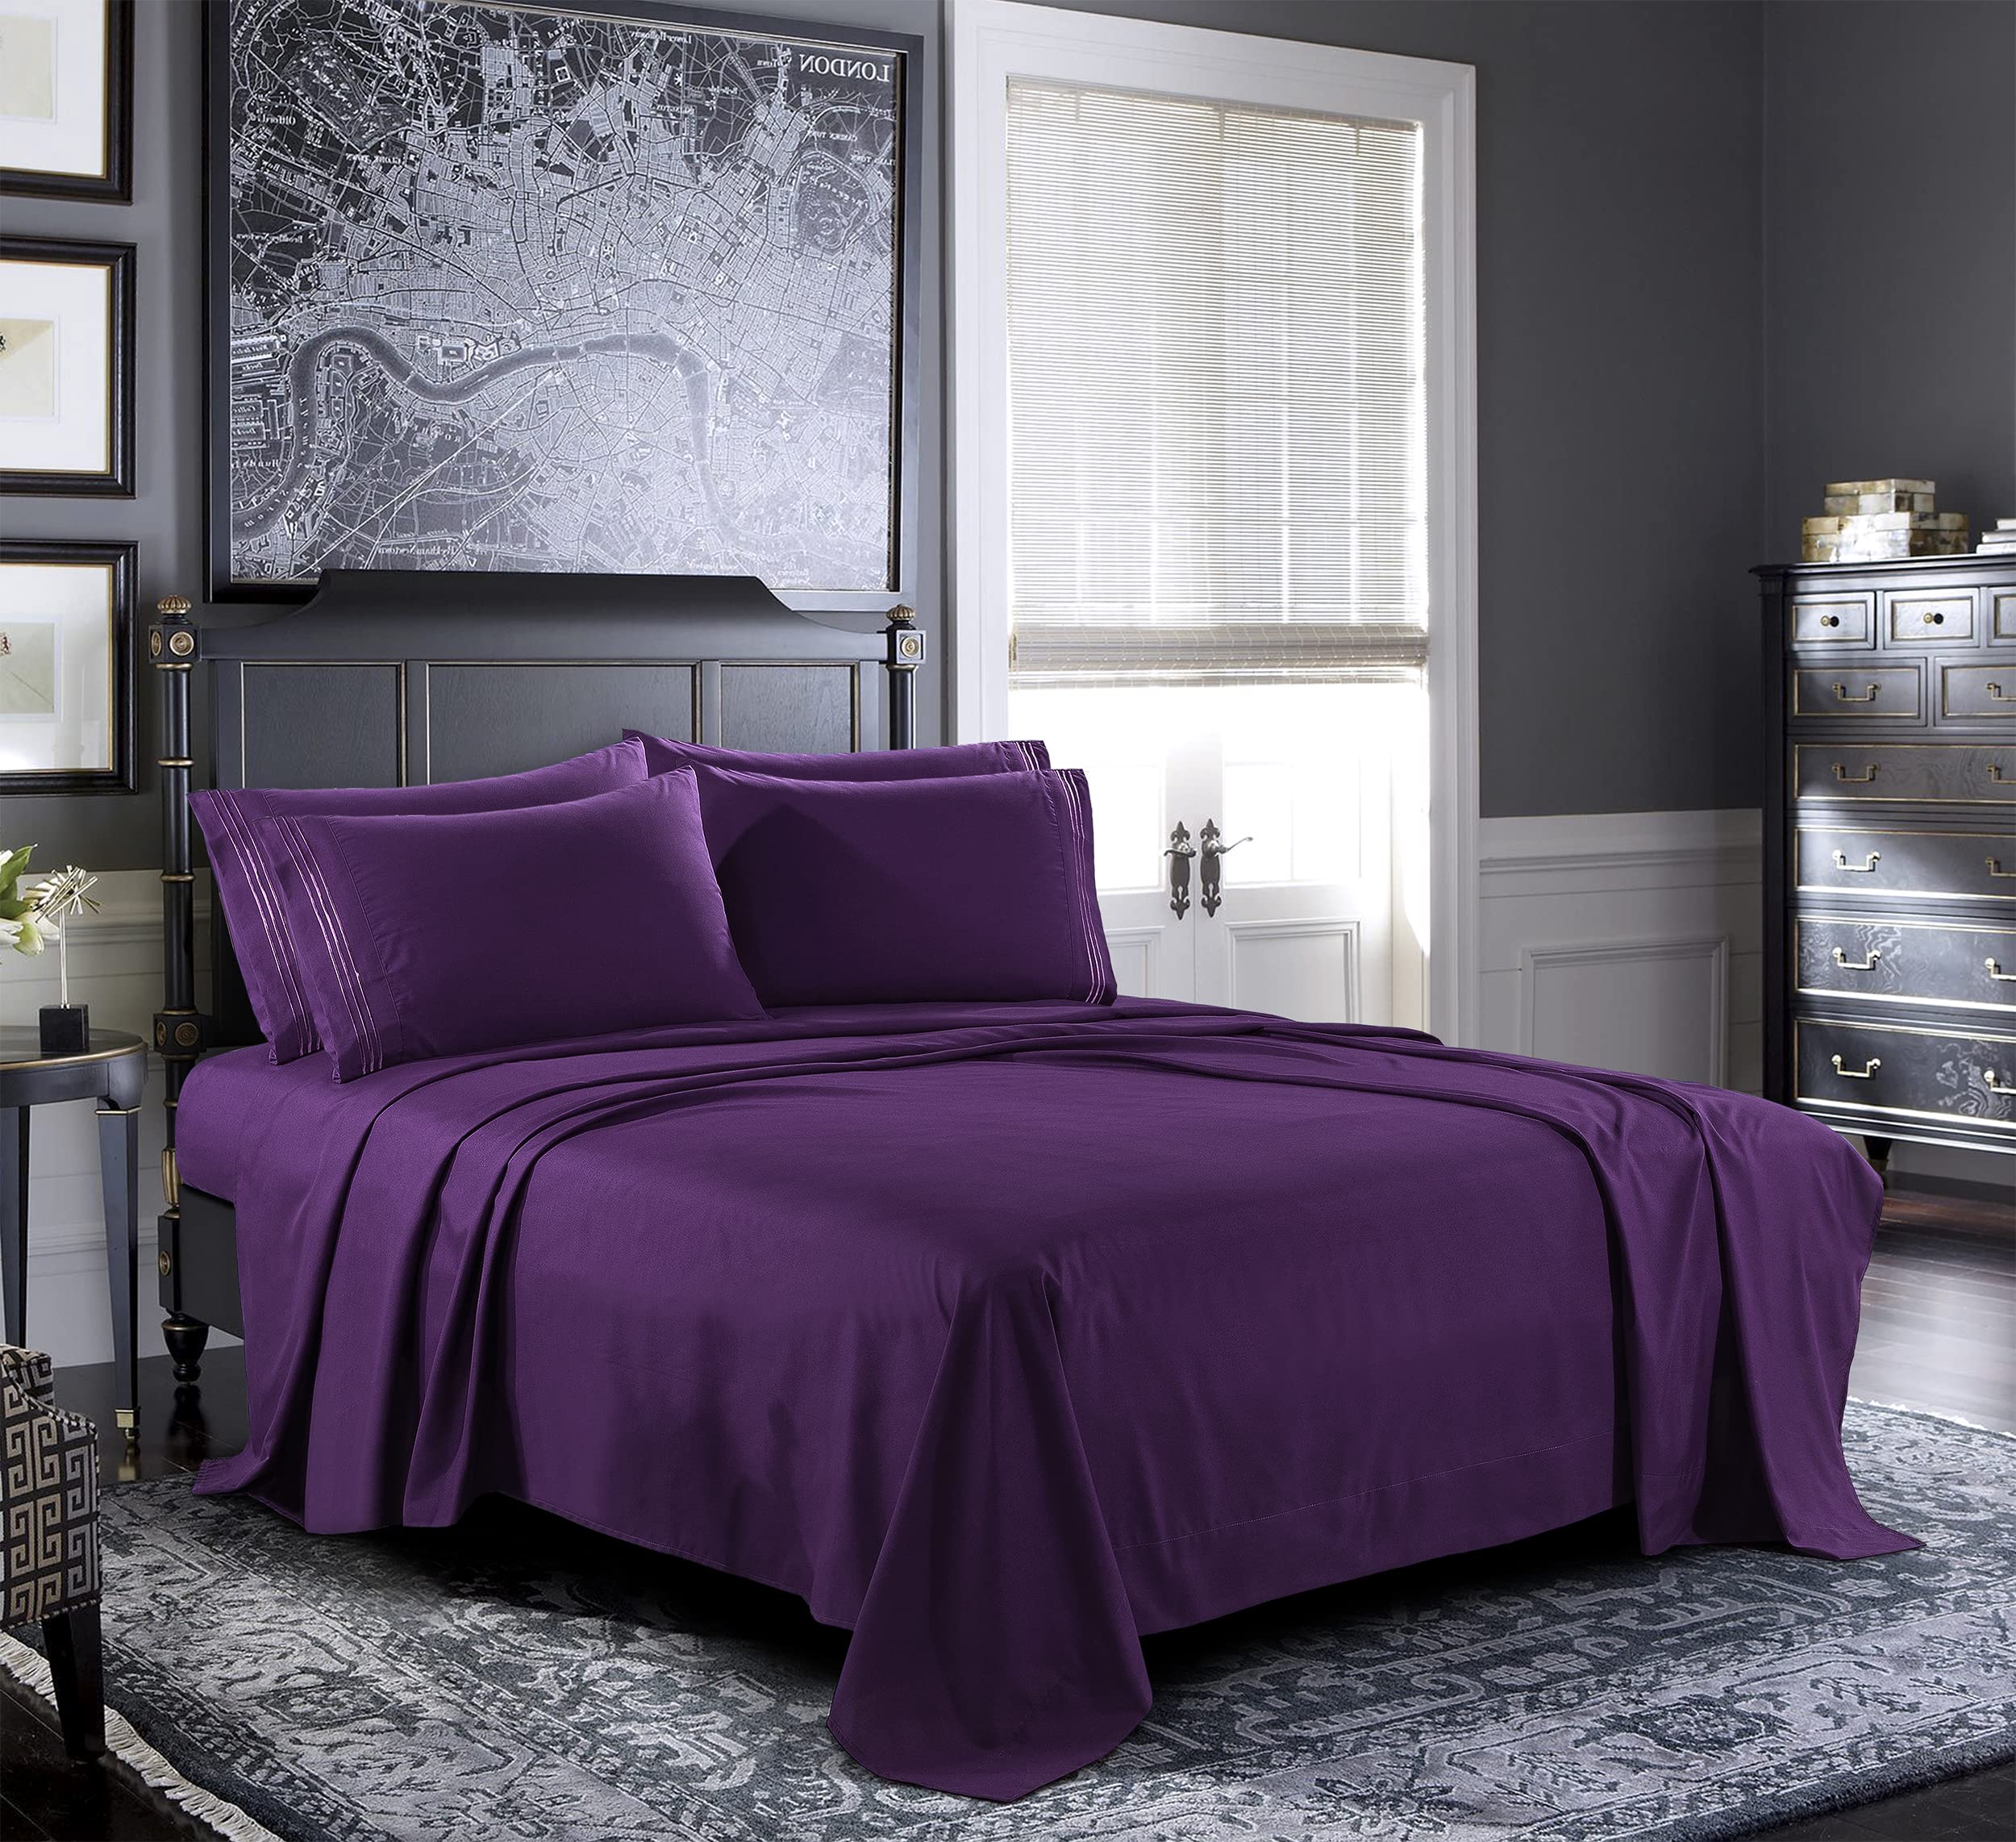 PURE BEDDING Bed Sheets Queen Sheet Set [6-Piece, Purple] Hotel Luxury  1800 Brushed Microfiber Soft and Breathable Deep Pocket Fitted Sheet,  Flat Sheet, Pillow Cases